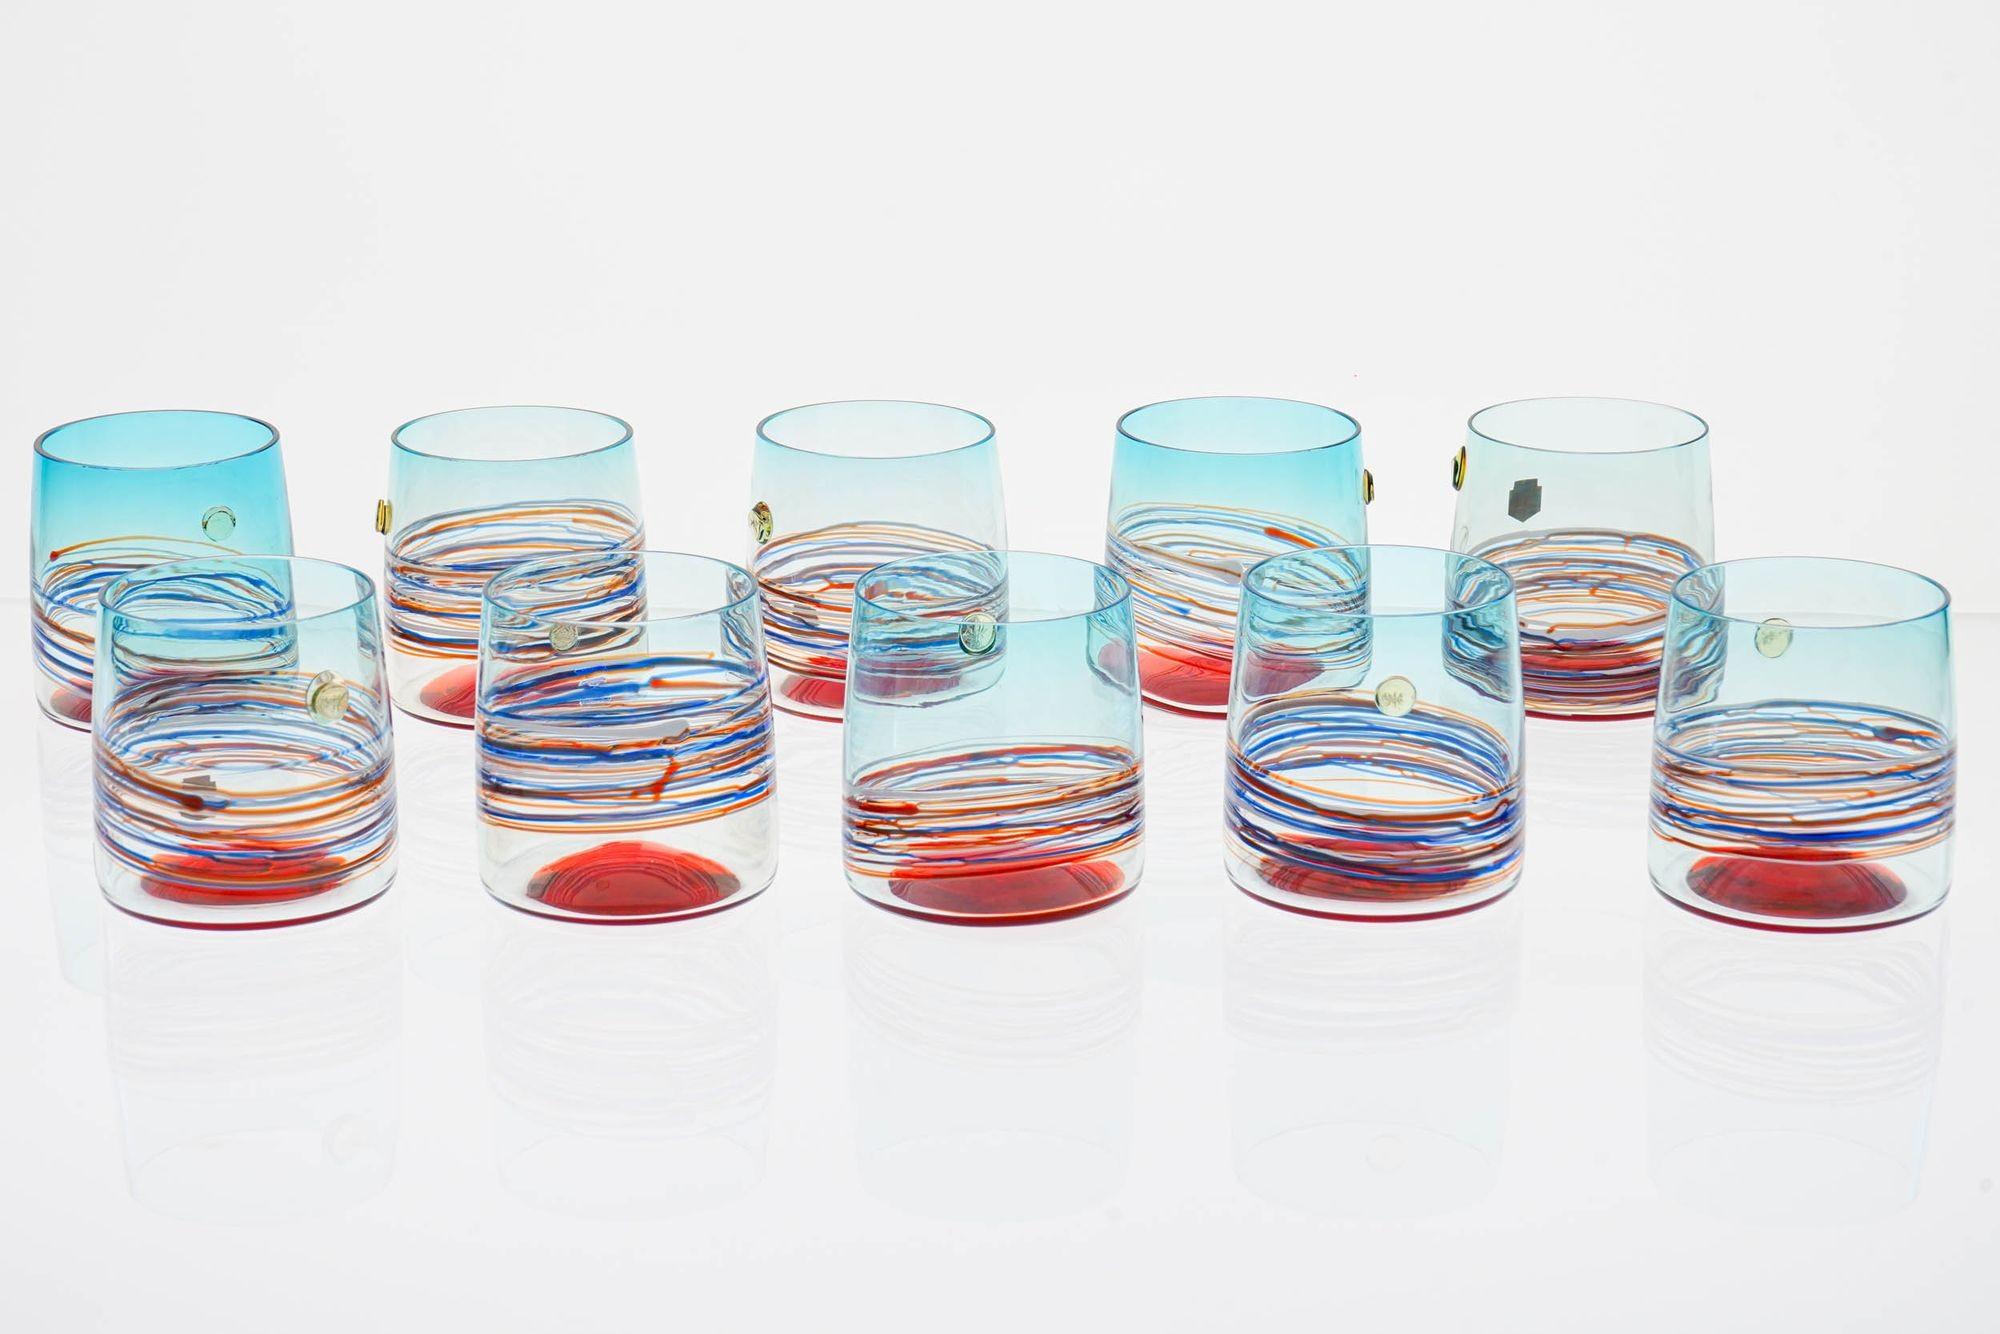 This set of 10 Cenedese cocktail/whisky glasses, meticulously crafted in the renowned Murano glass-making tradition, is a rare work of art.

These glasses showcase a remarkable array of glass-making techniques. From the ethereal Aquamarine Sfumato